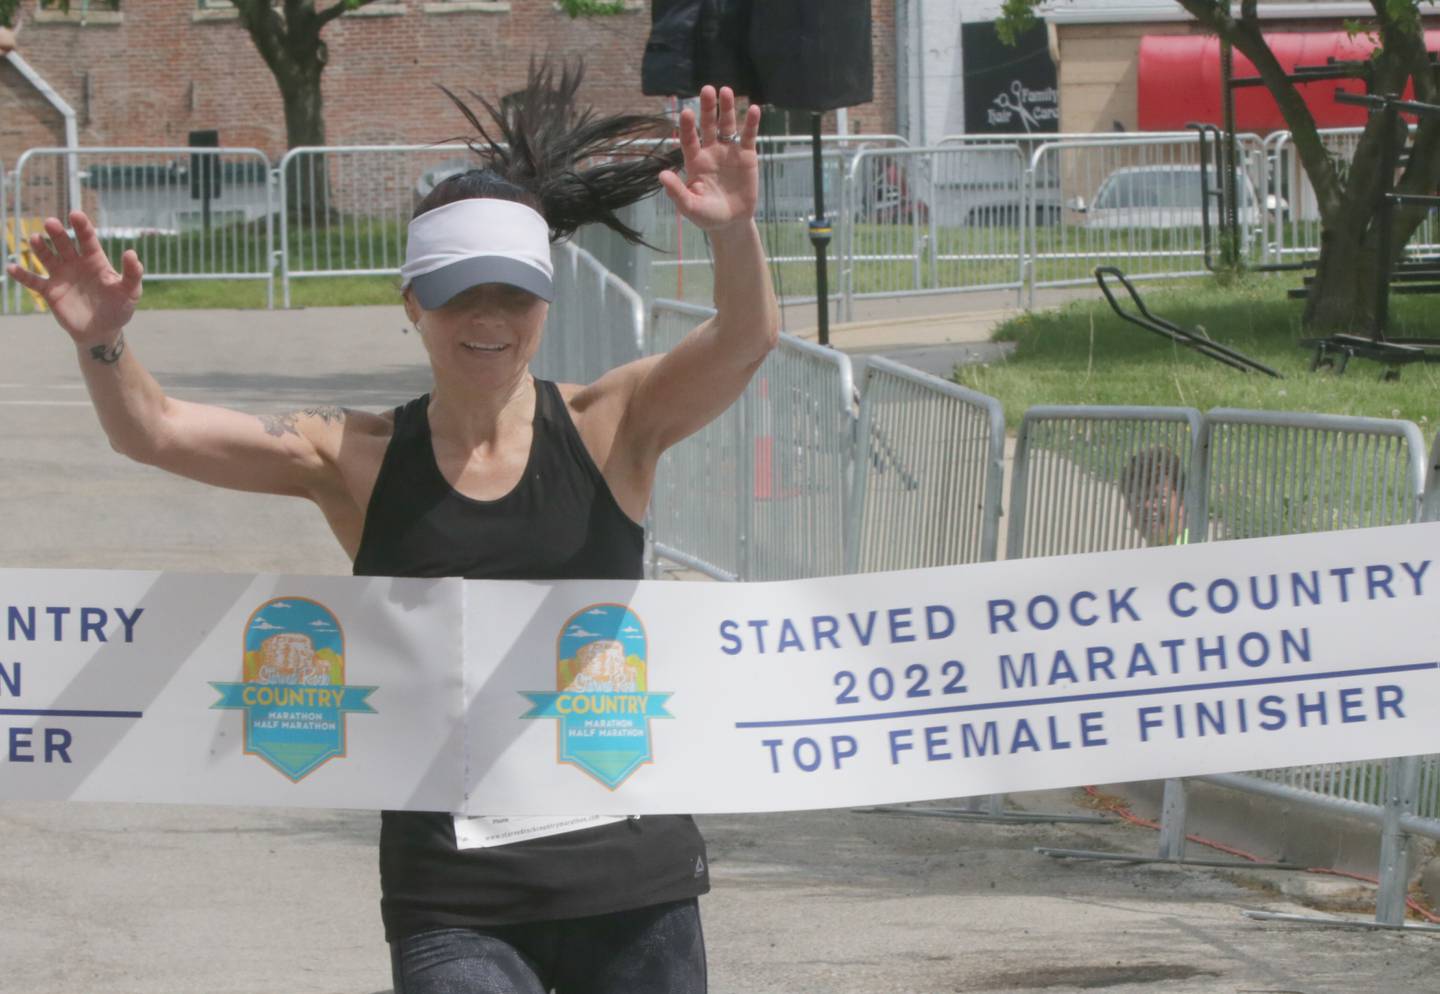 Angie Lambi of Dexter, Michigan, is the best female World Cup finalist as she crosses the finish line during the Starved Rock Marathon on Saturday, May 14, 2022 in Ottawa.